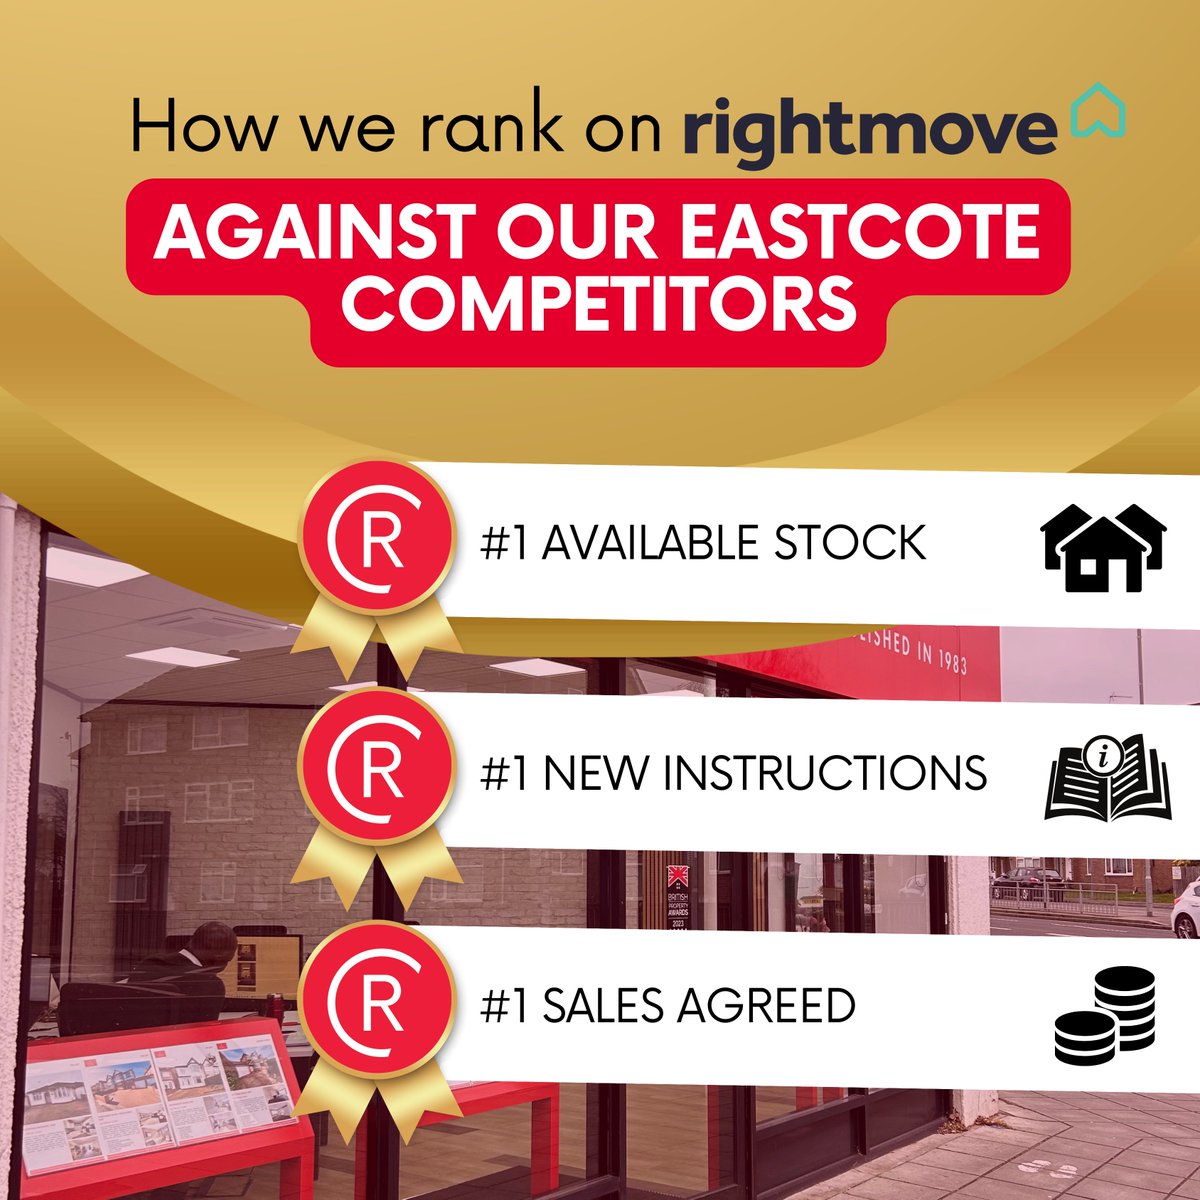 We are very proud to rank 1st place across every major metric on @Rightmove in Eastcote 🥇 If you are looking to sell your property, you are in safe hands with us! 📞 Give us a call on 020 8429 1444